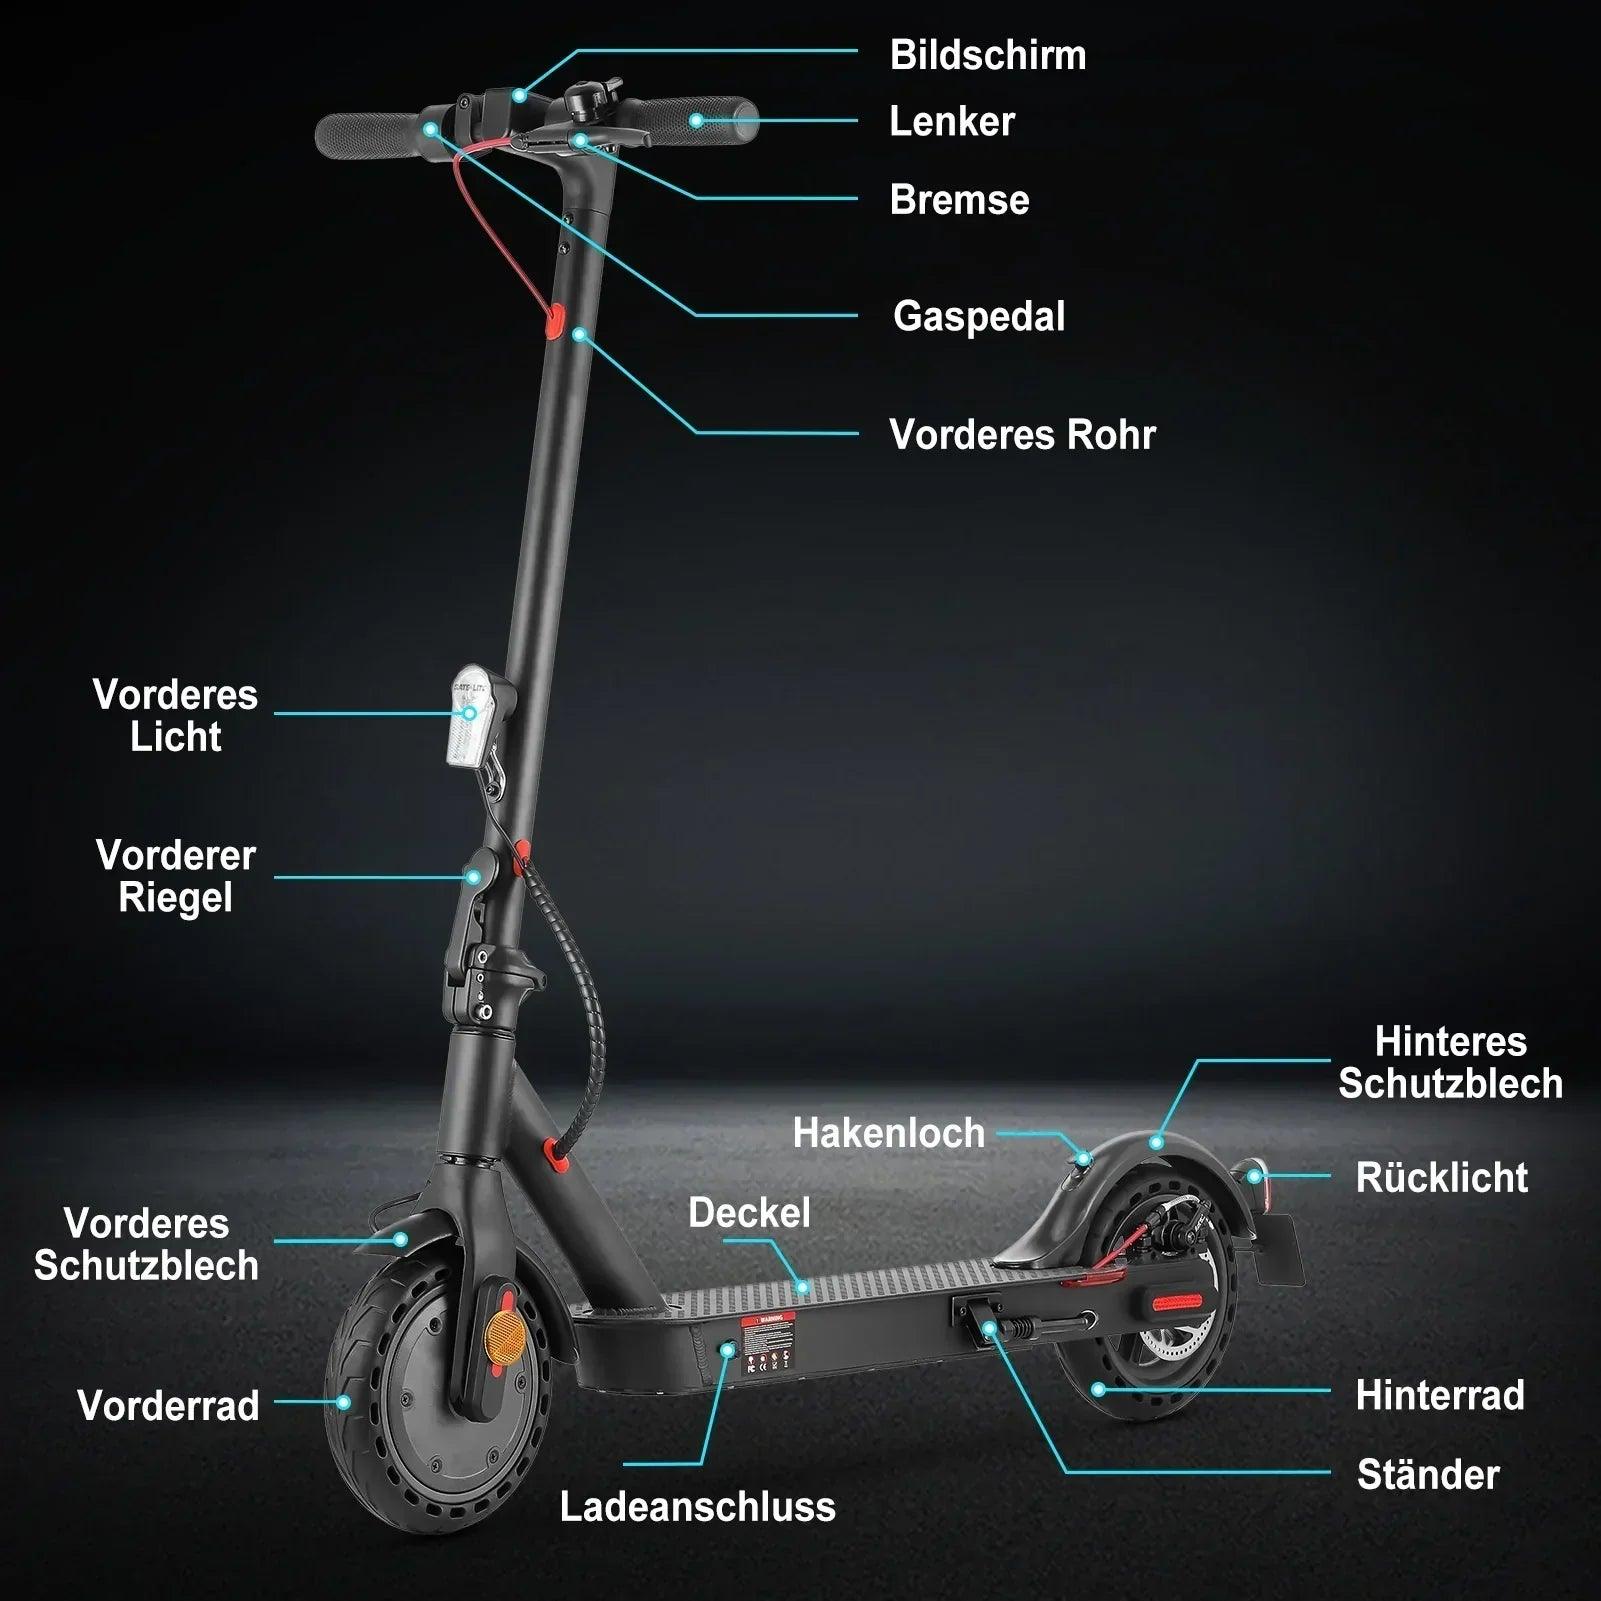 E9 Pro (ABE,eKFV) Electric Scooter - Pogo Cycles available in cycle to work